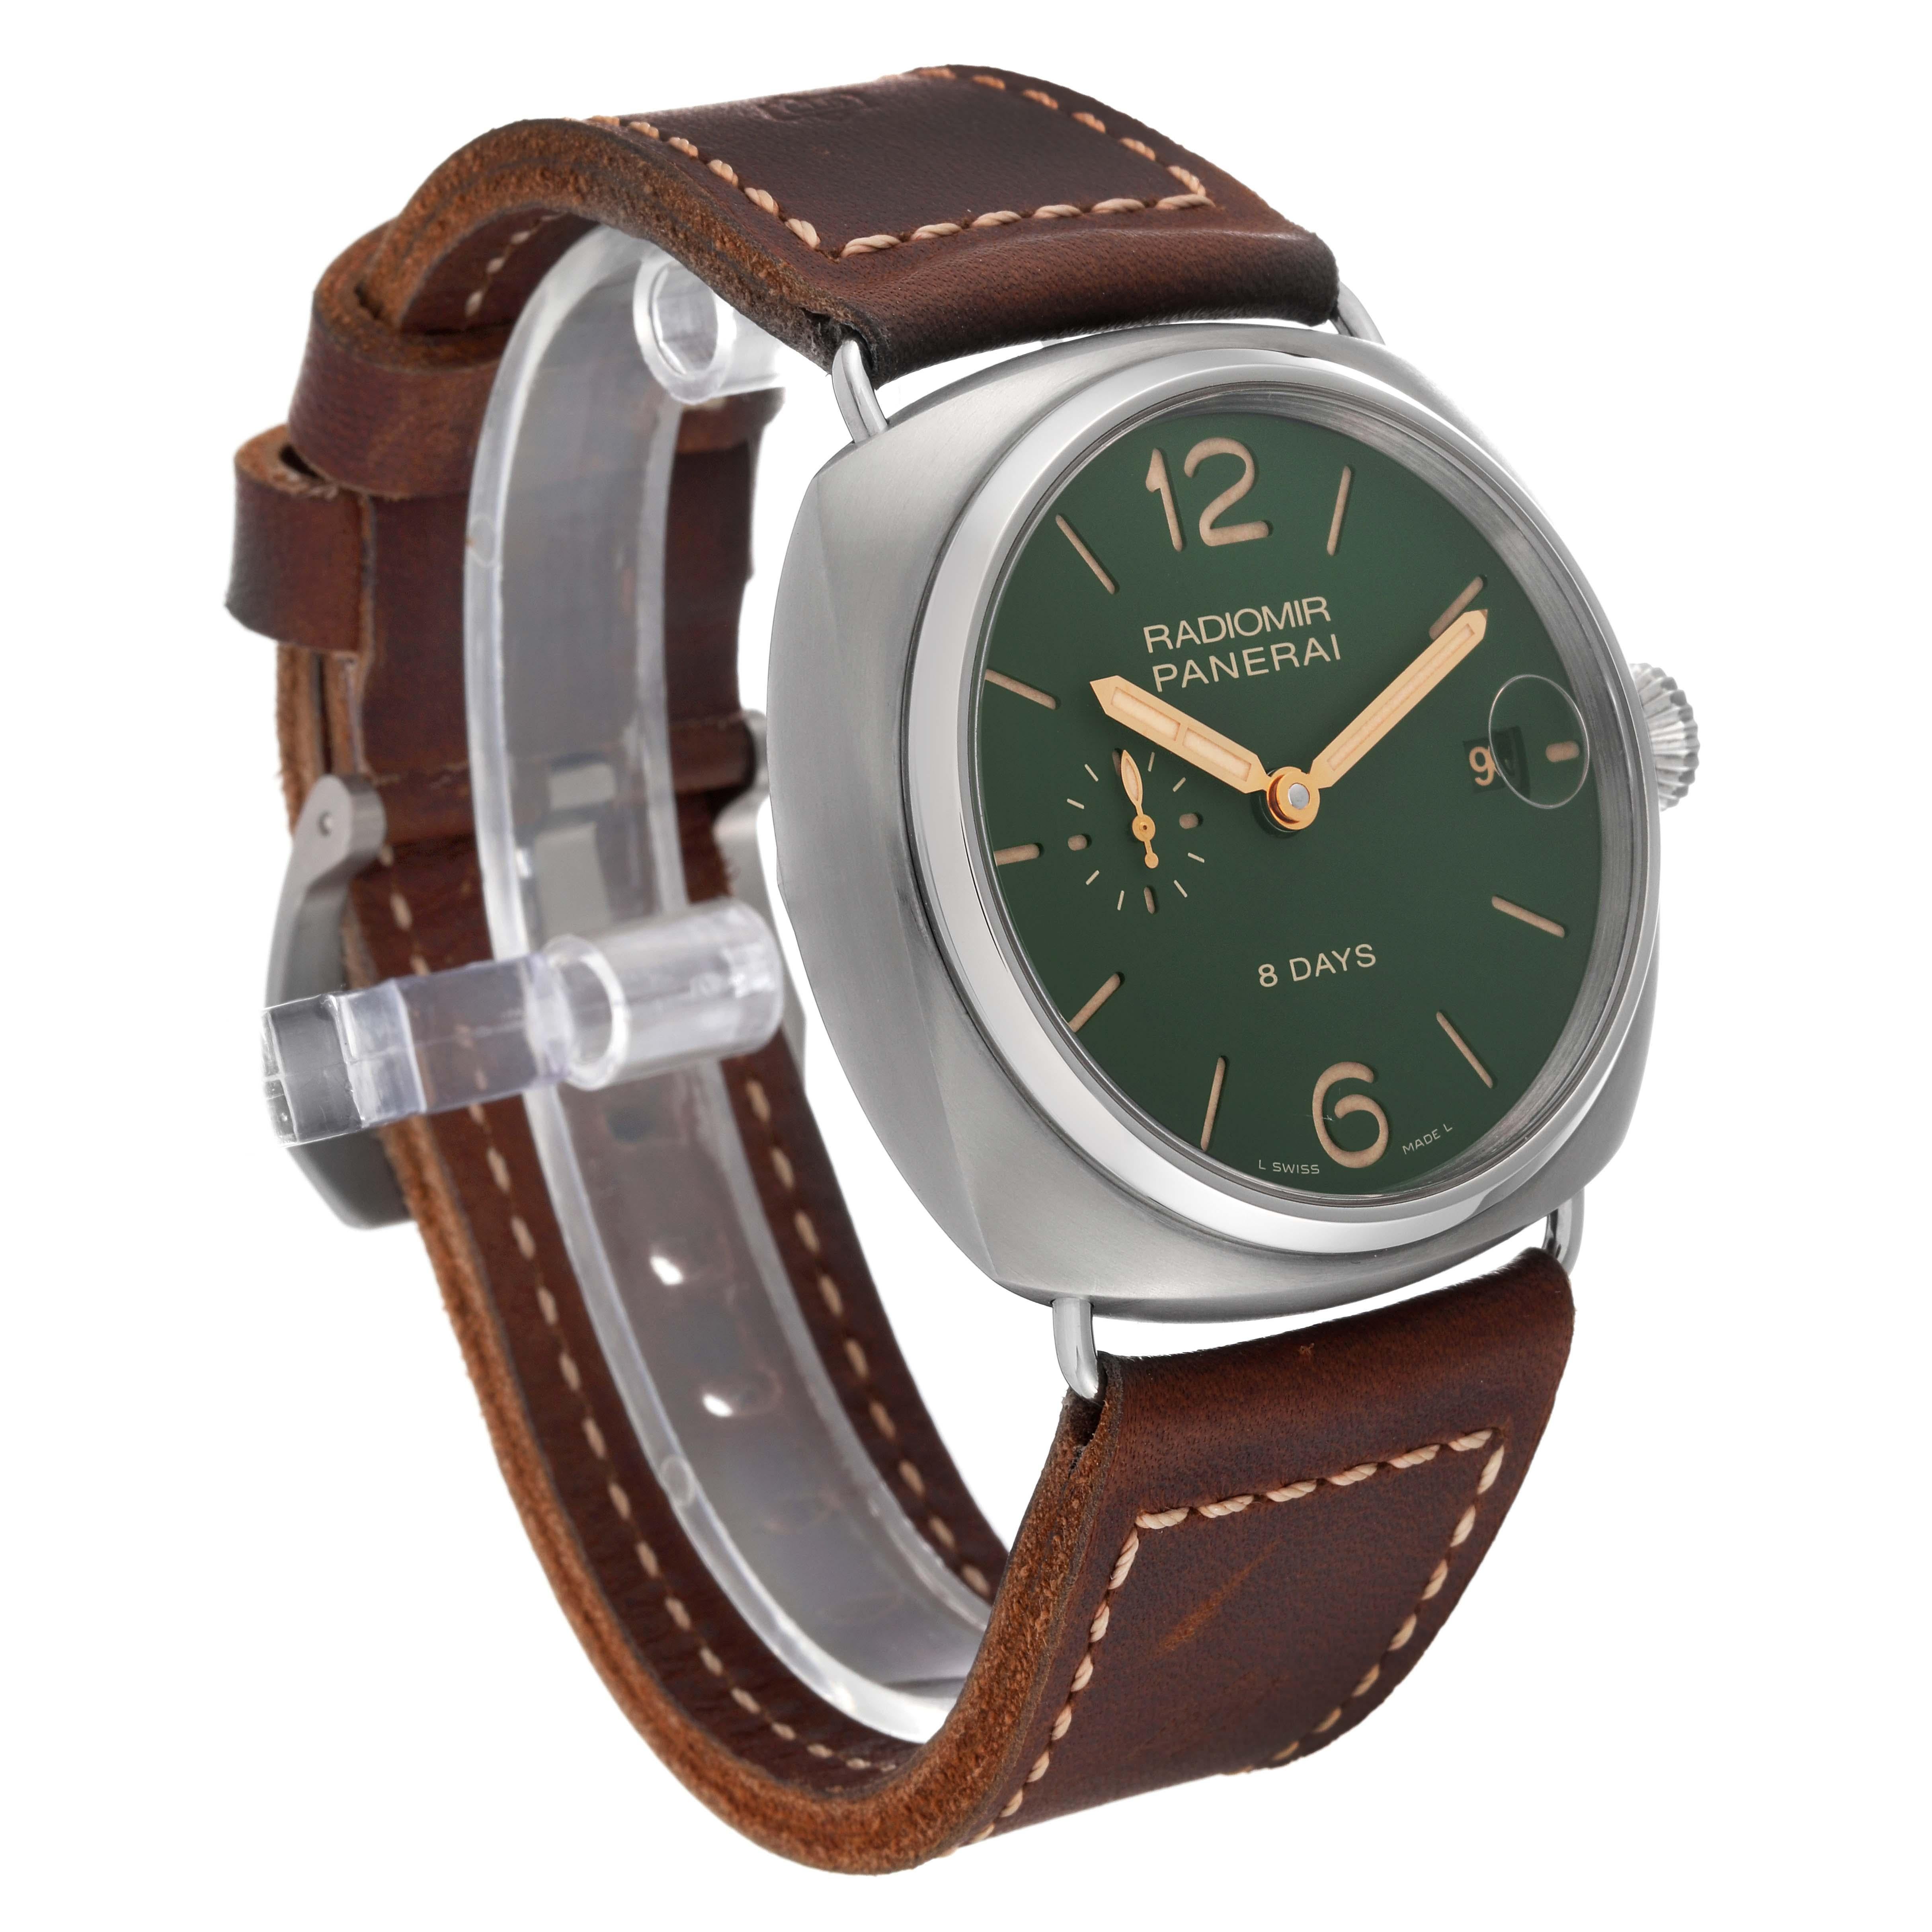 Panerai Radiomir 8 Days Green Dial Titanium Mens Watch PAM00735 Box Papers In Excellent Condition For Sale In Atlanta, GA